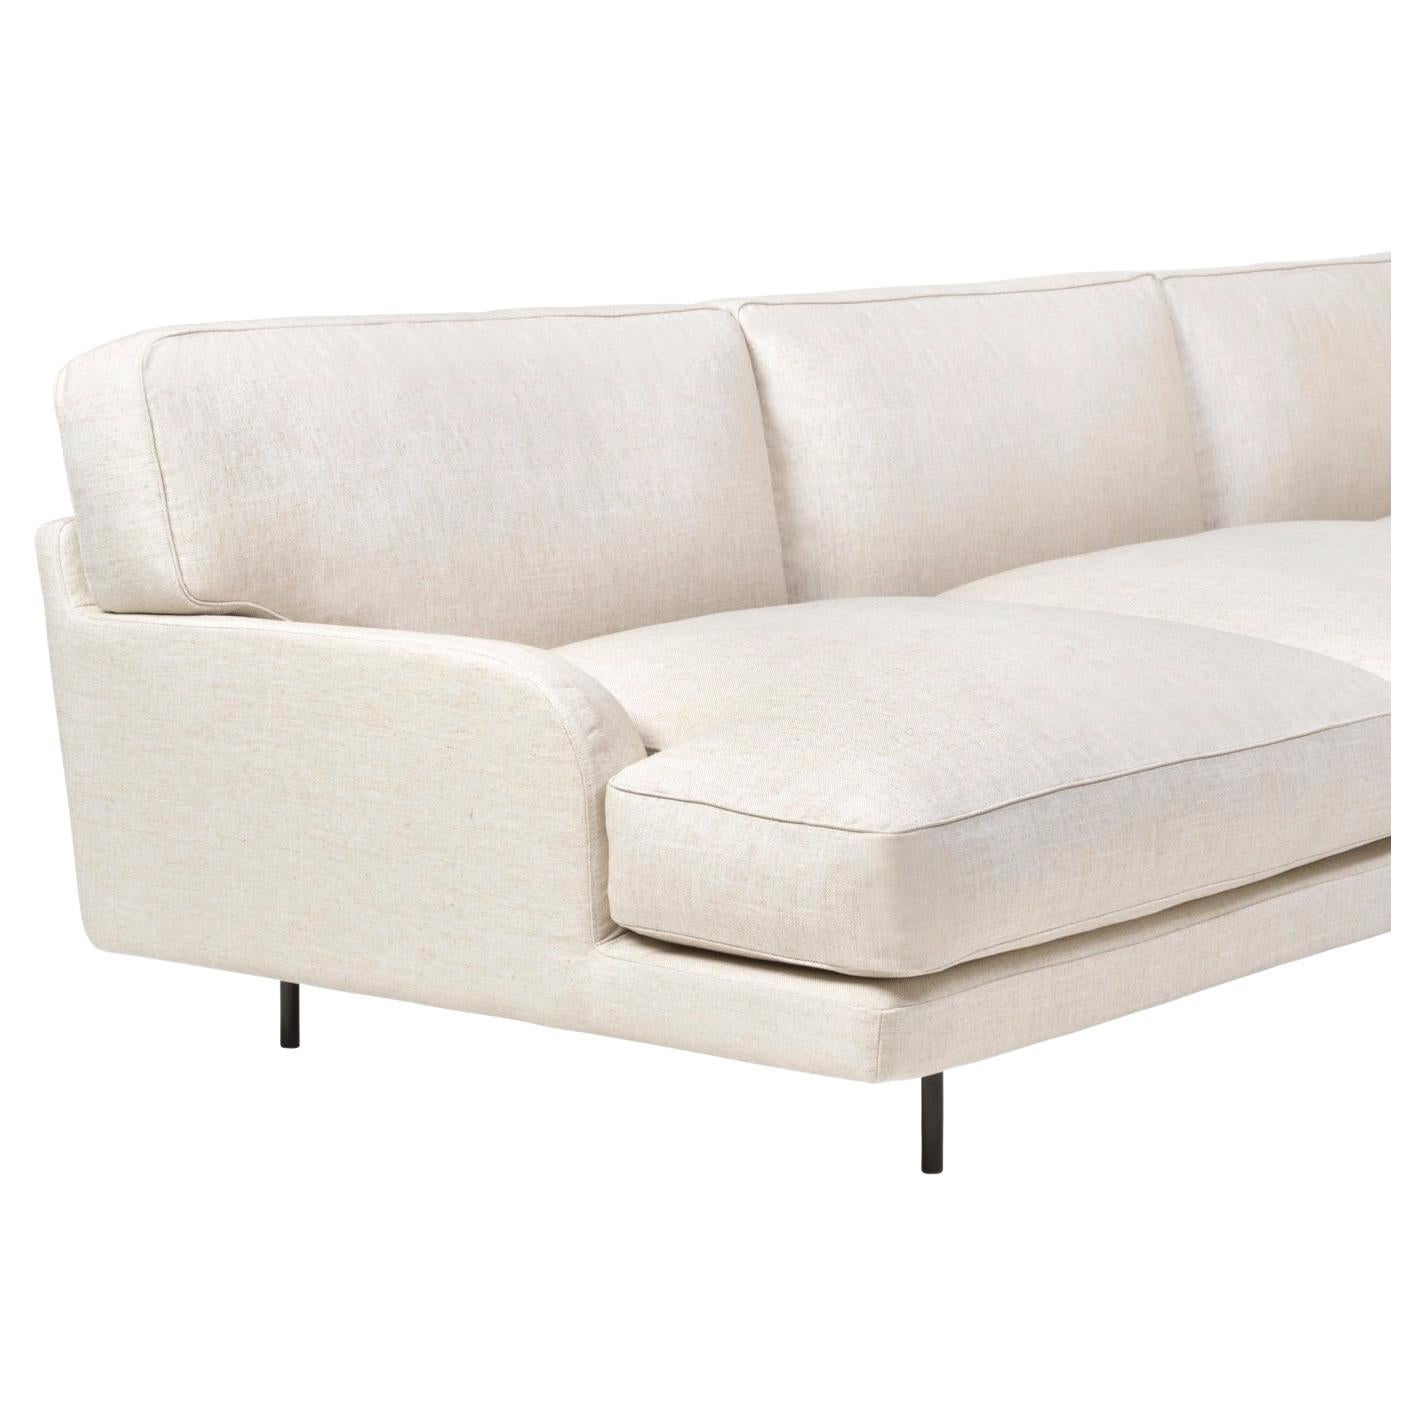 Customizable Gubi Flaneur Module, Chaise Longue with Righ Designed by Gamfratesi For Sale 6